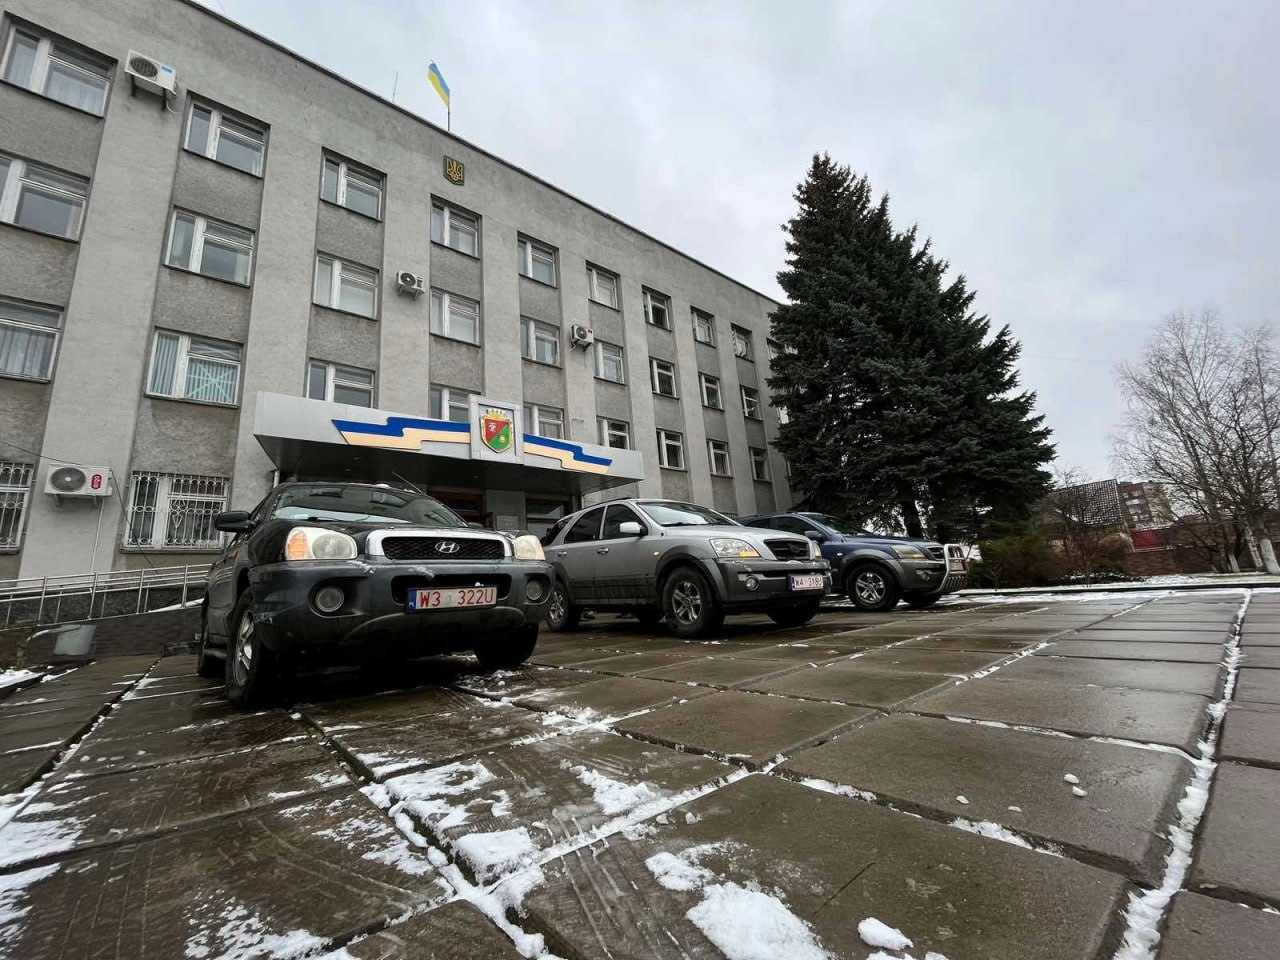 Transfer of three cars to the Armed Forces of Ukraine bought with funds raised by the staff of the Zdolbuniv Town Council